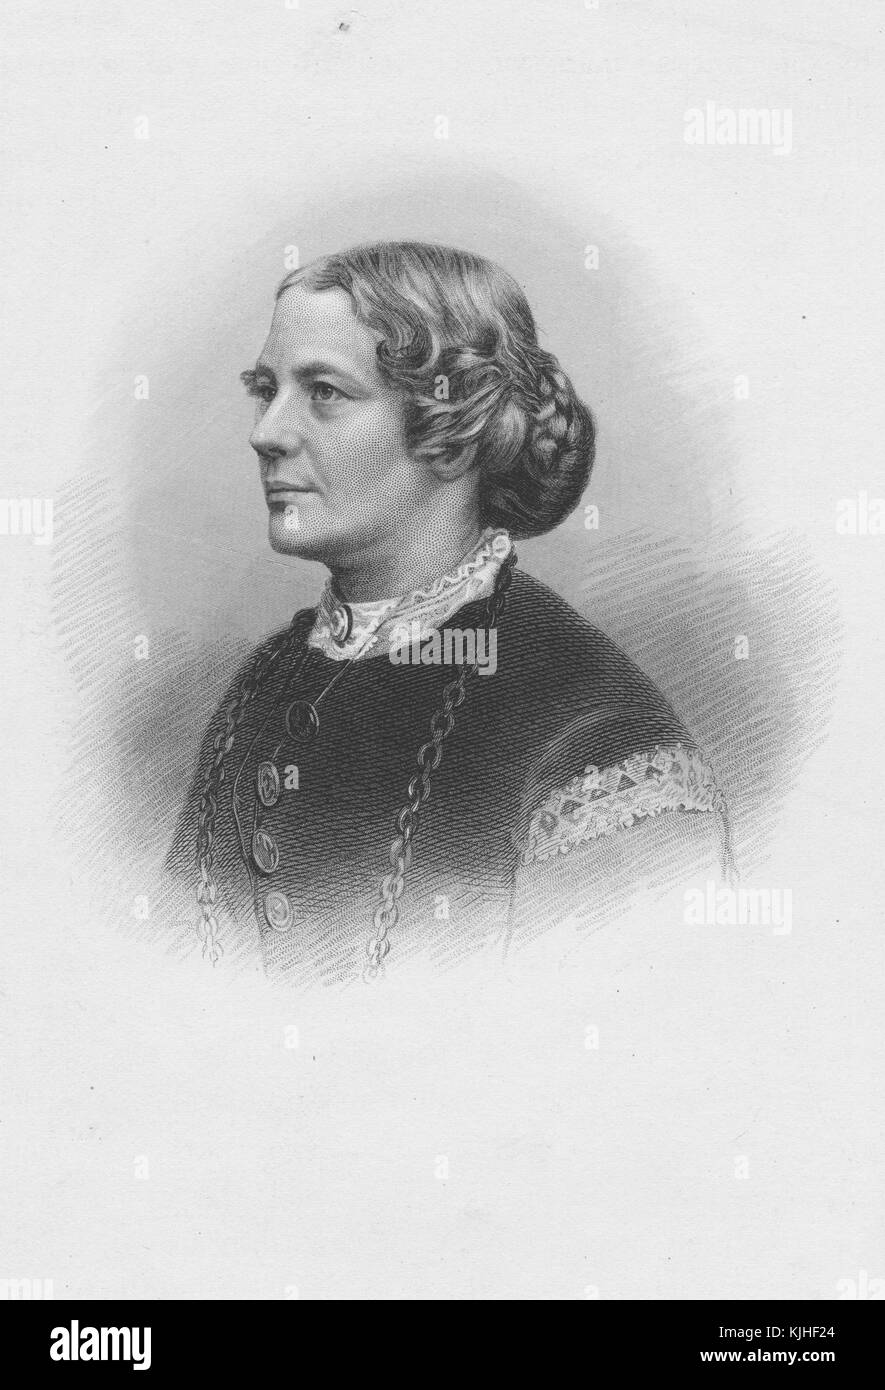 An etching from a portrait of a woman identified as Mrs James M White, she is wearing a black dress with lace sewn on to the sleeves, she has a small necklace with a polished black stone attached to it and a larger necklace consisting of a chain, she also has a small brooch pin on her neck, 1870. From the New York Public Library. Stock Photo